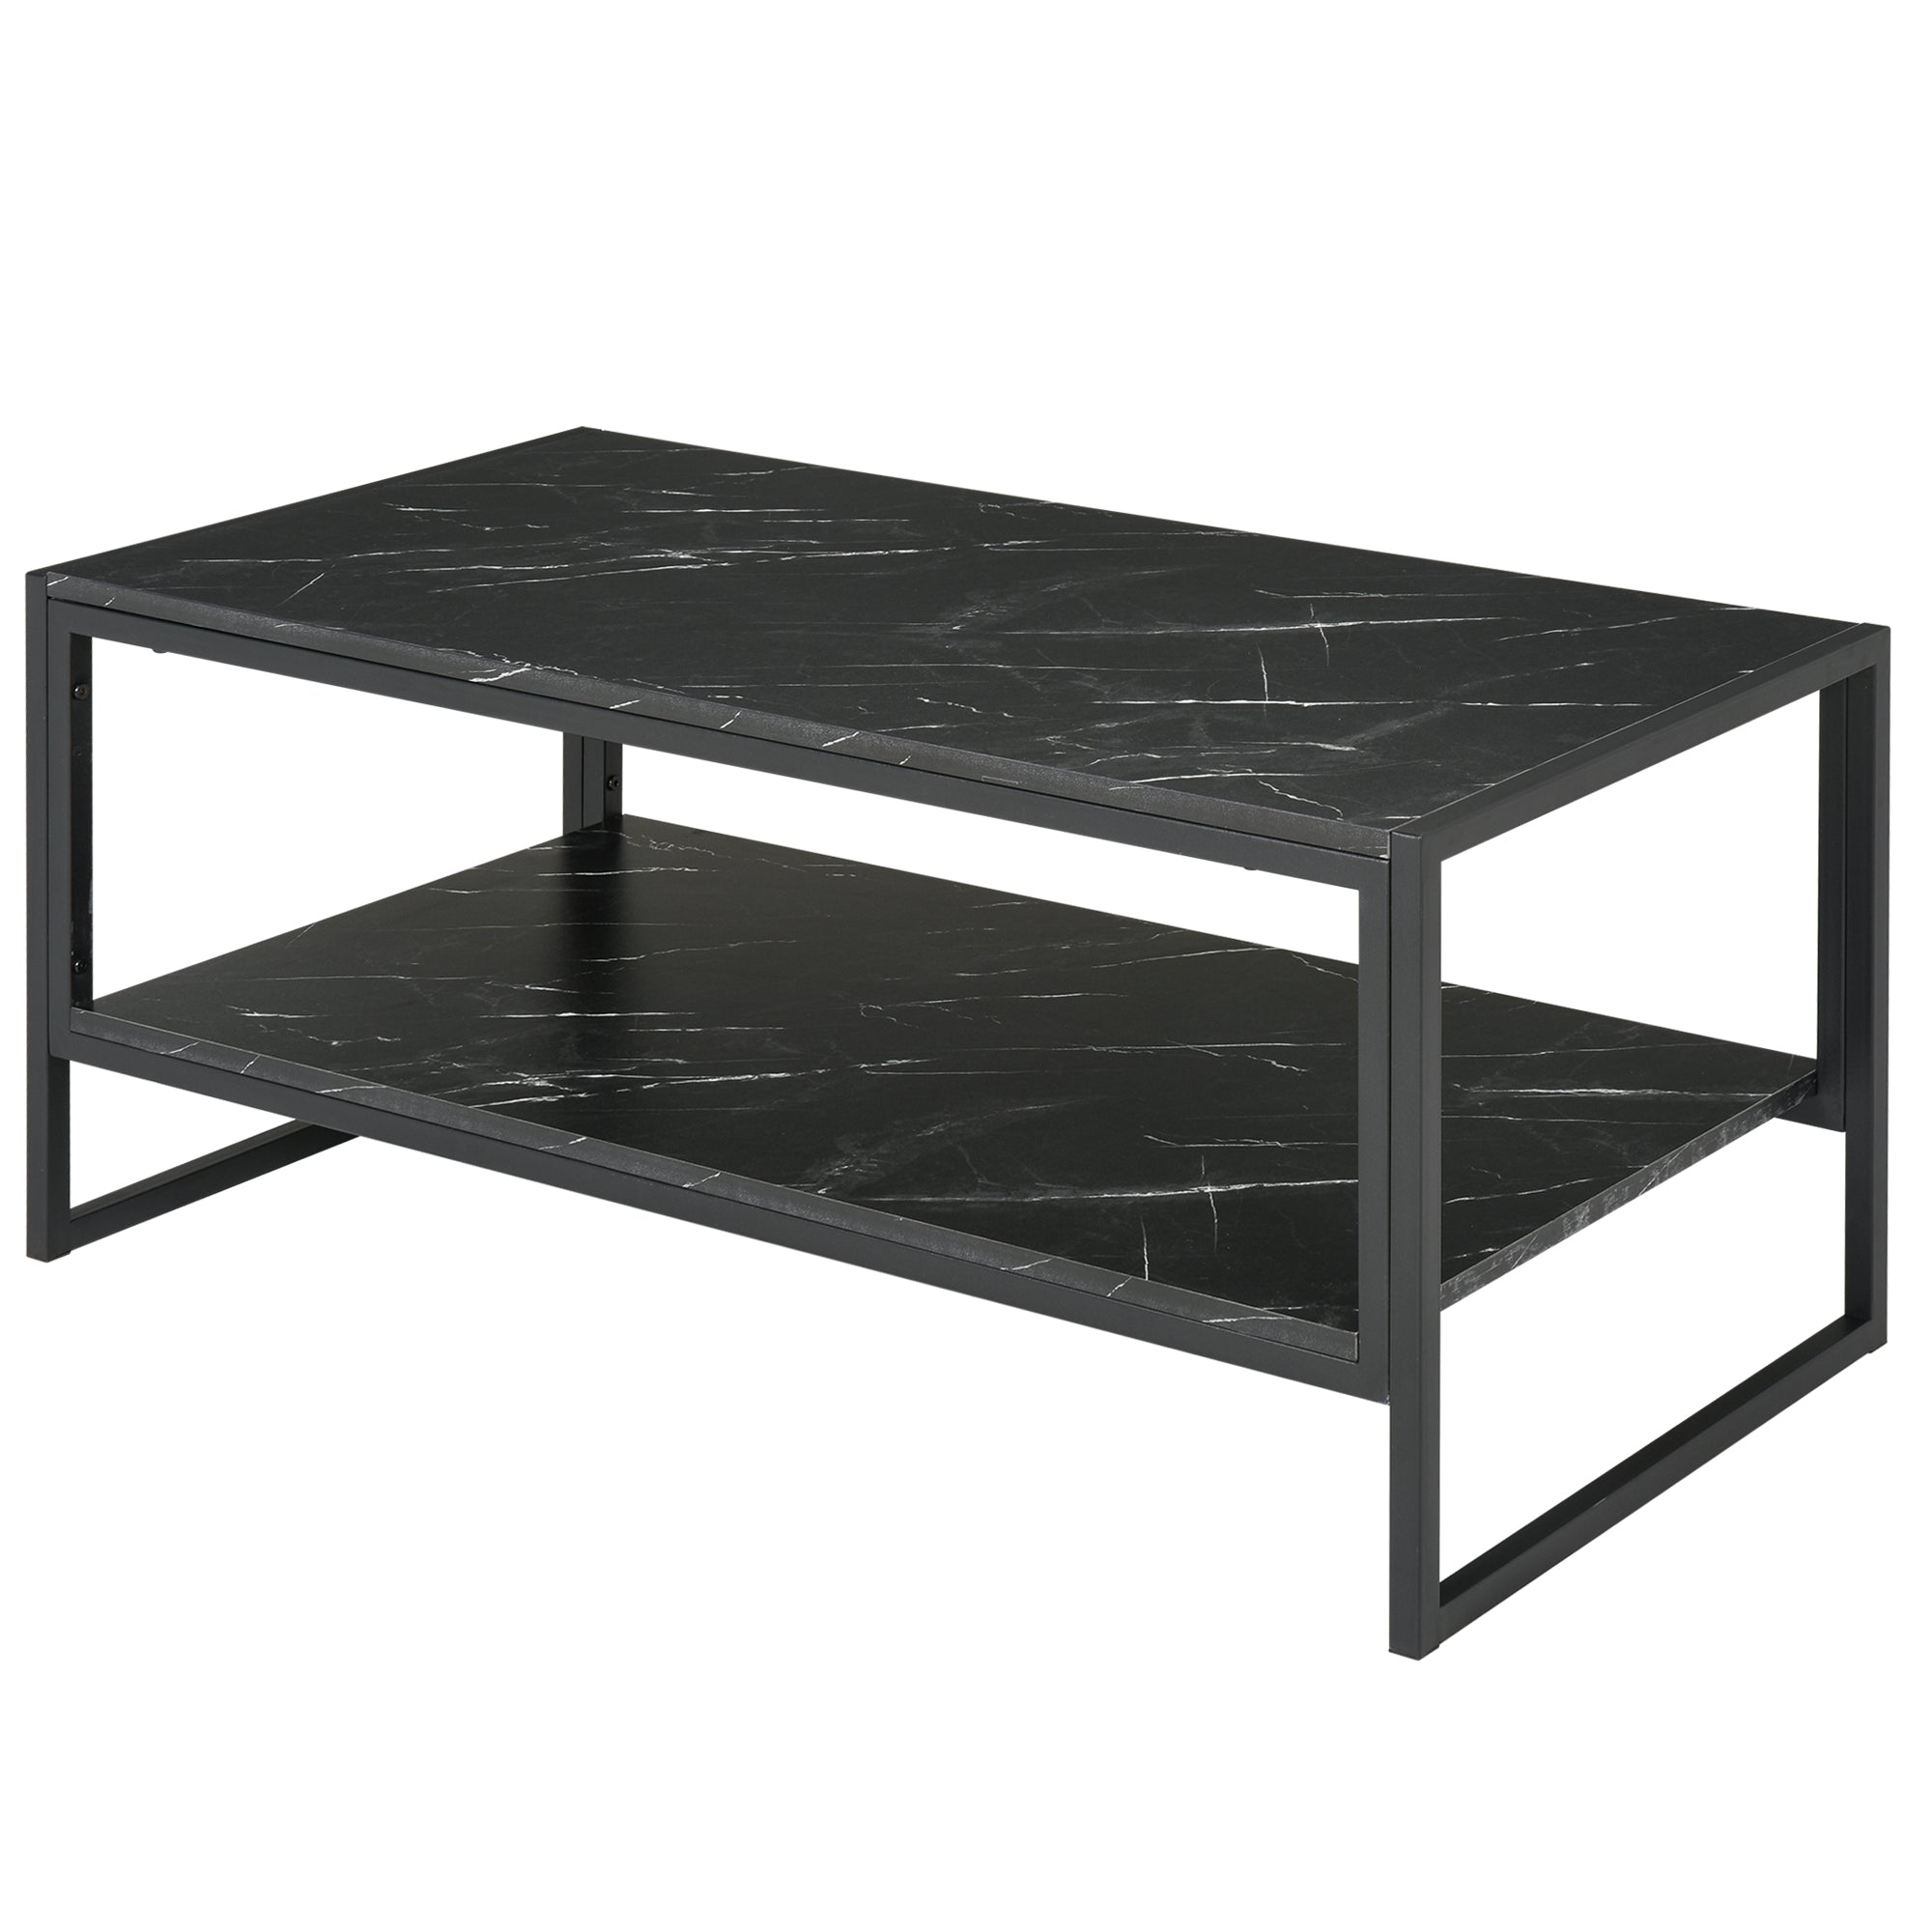 Two-Tier Laminate Marble Print Table Top Coffee Table w/ Metal Frame Foot Pads Elegant Modern Style 2 Shelves Home Display Storage Unit Black-0